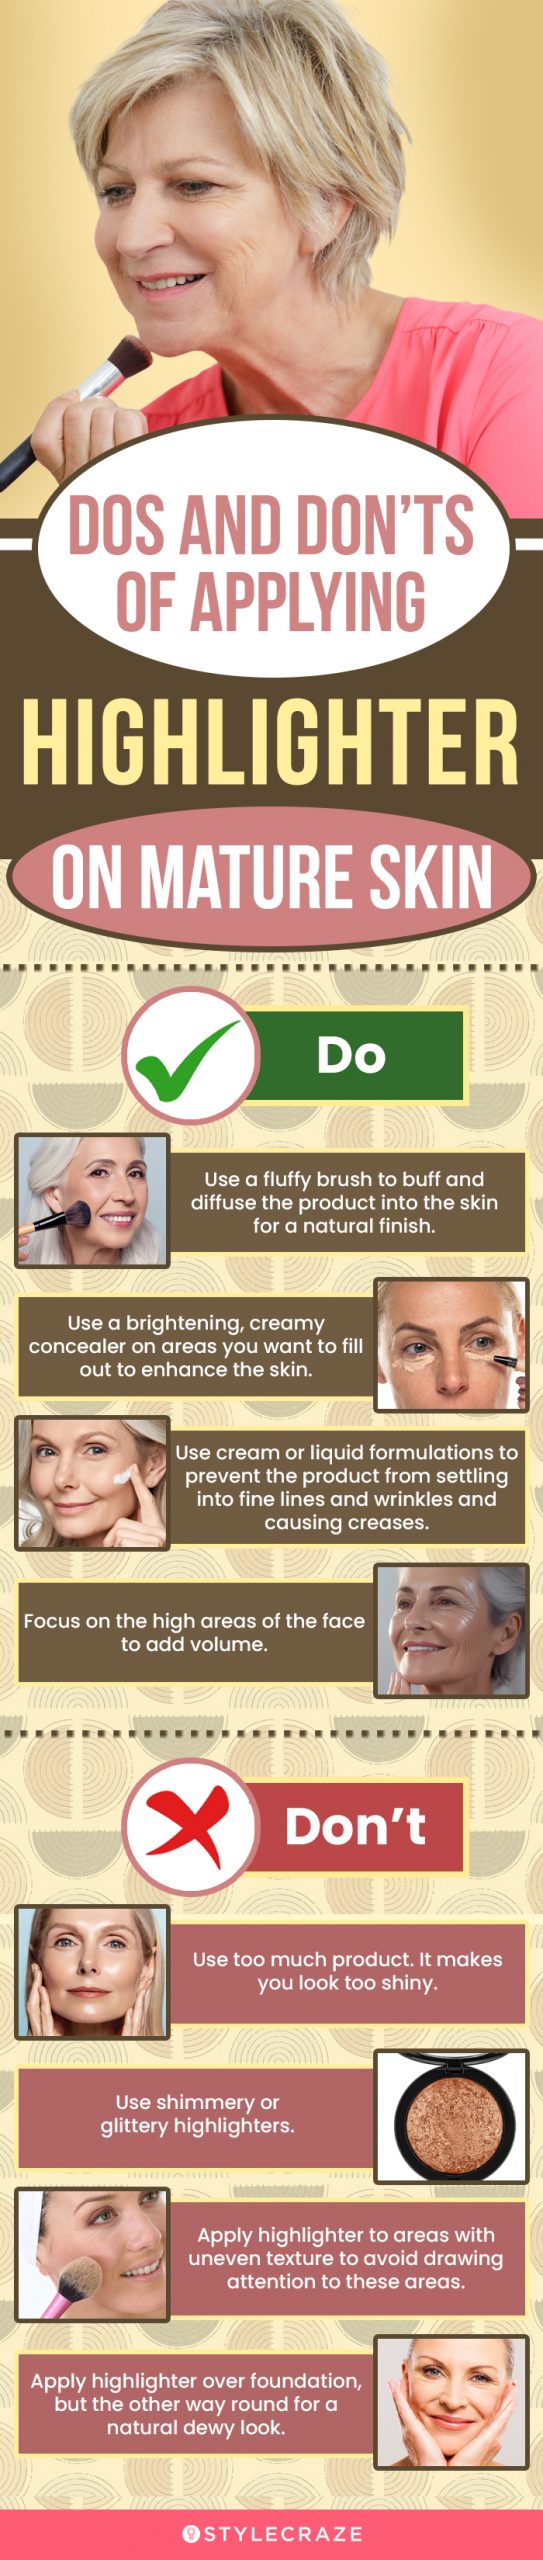 Dos And Don’ts Of Applying Highlighter On Mature Skin (infographic)